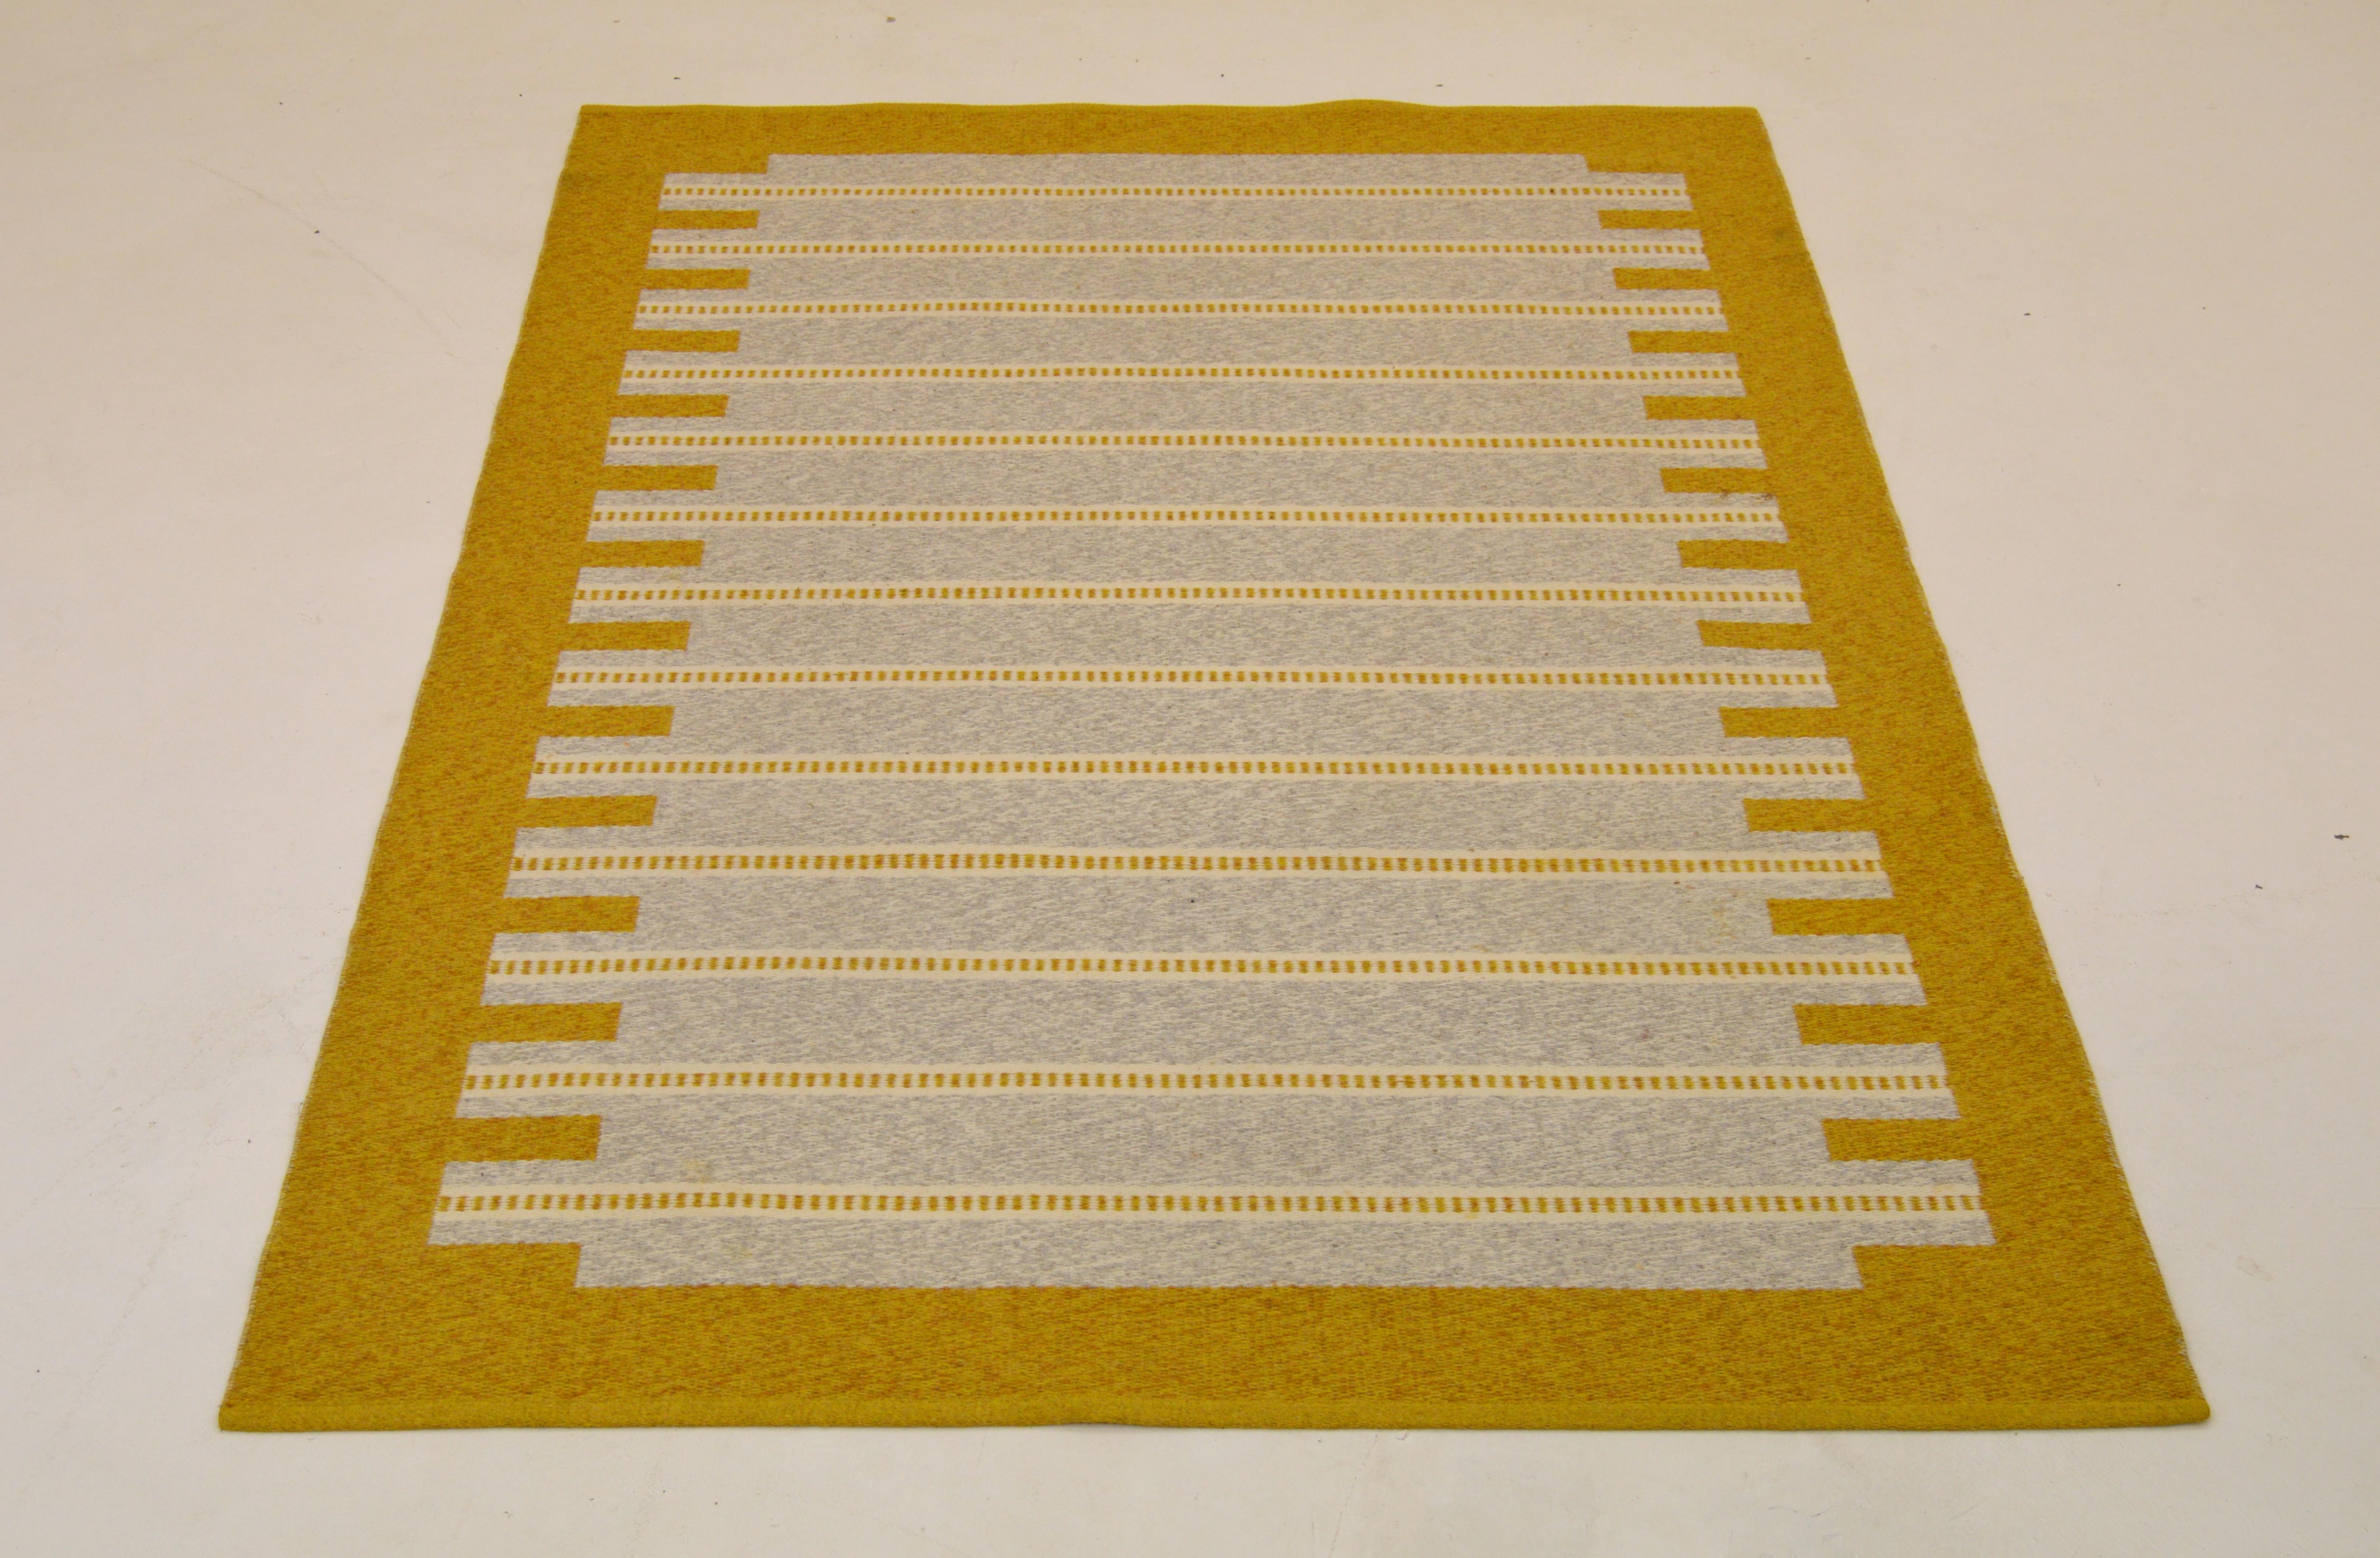 A Scandinavian Modern Rollakan carpet.
Made in Sweden during the 1950s-1960s, midcentury period. 

Handwoven wool. Yellow and grey are the dominant colors.
Good vintage condition with small signs of usage and minor stains.

Some missing